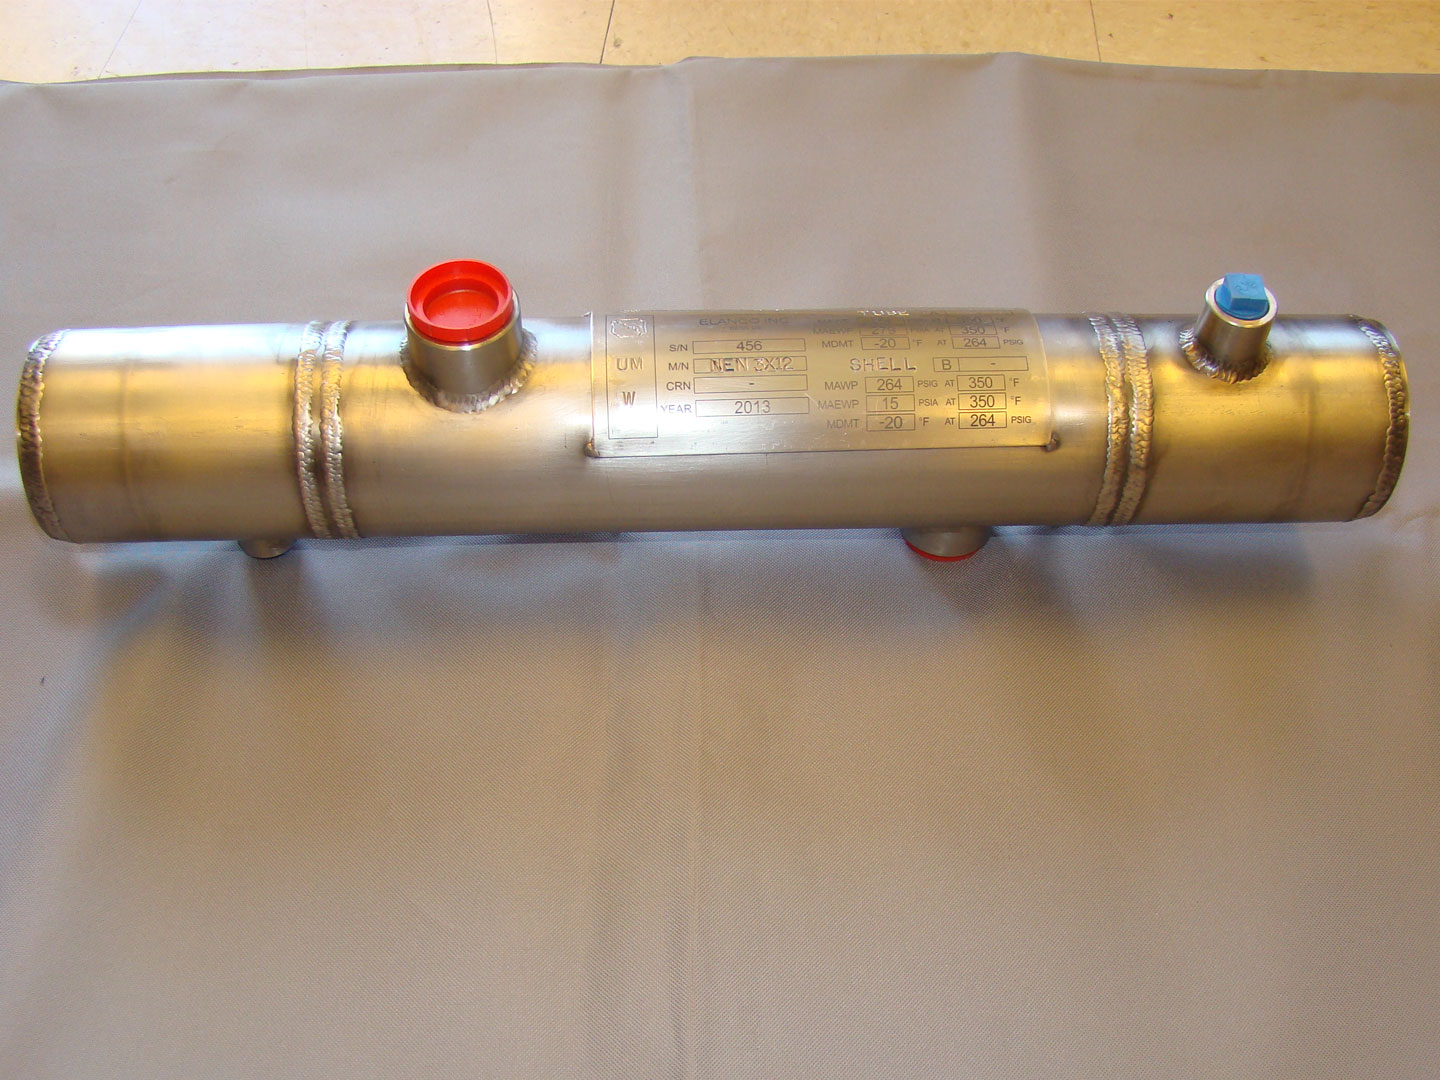 Specialized Shell and Tube Heat Exchangers